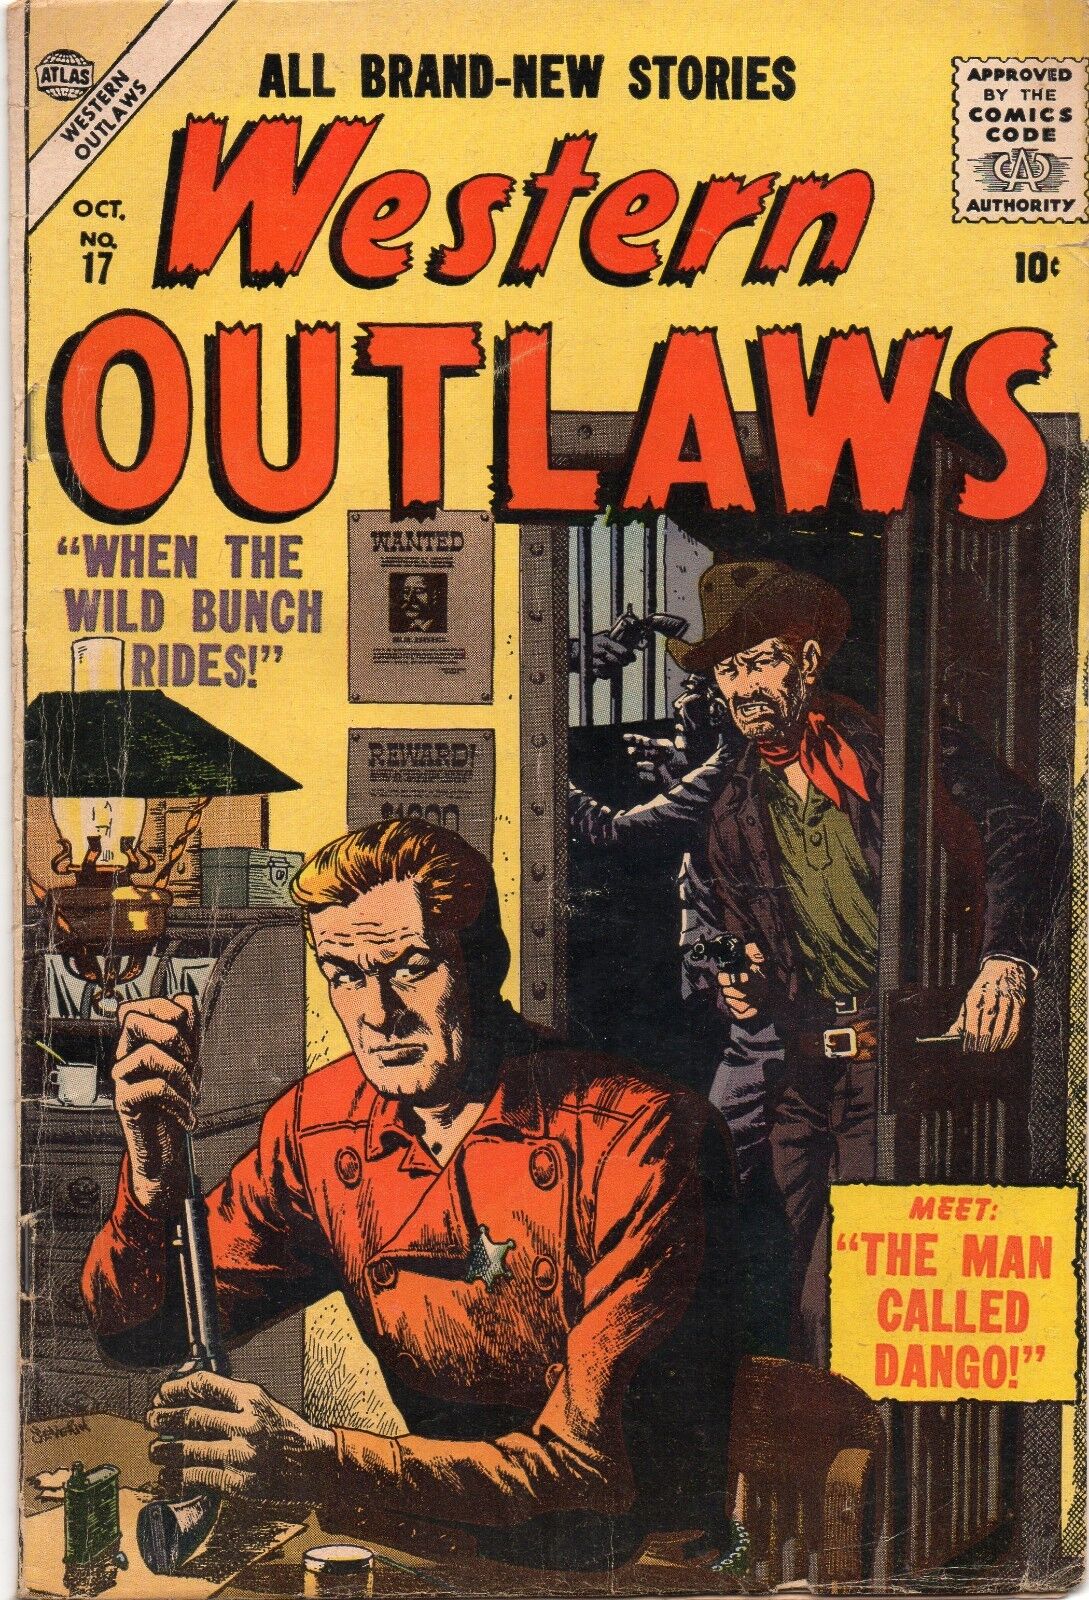 WESTERN OUTLAWS #17 Ultra RARE Golden Age HTF 1956